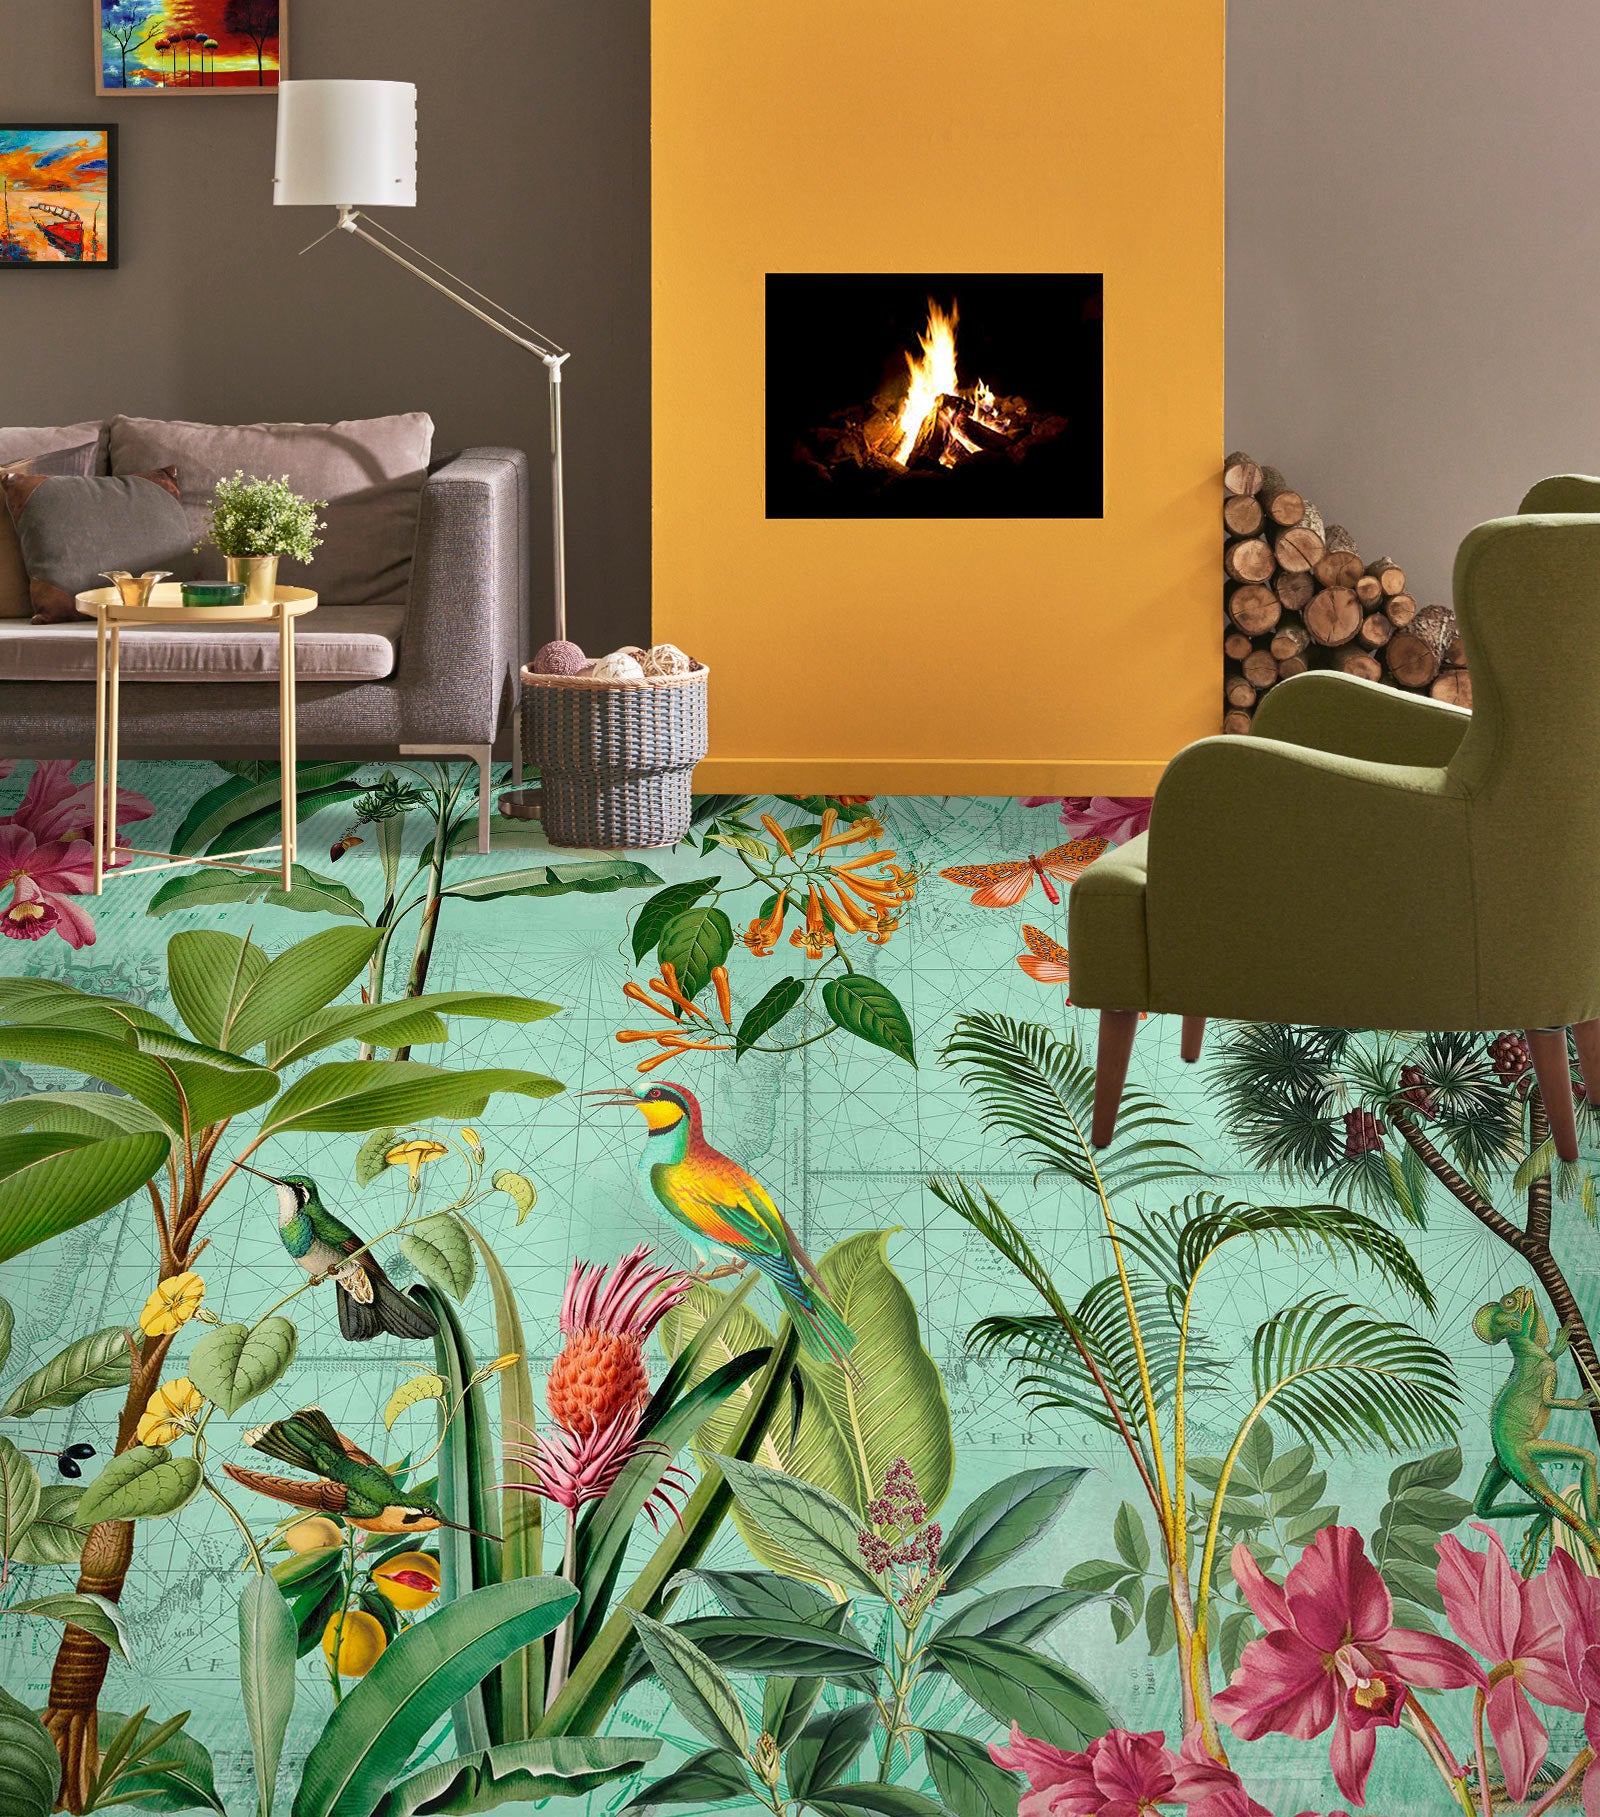 3D Flower Jungle Colorful Bird 10052 Andrea Haase Floor Mural  Wallpaper Murals Self-Adhesive Removable Print Epoxy